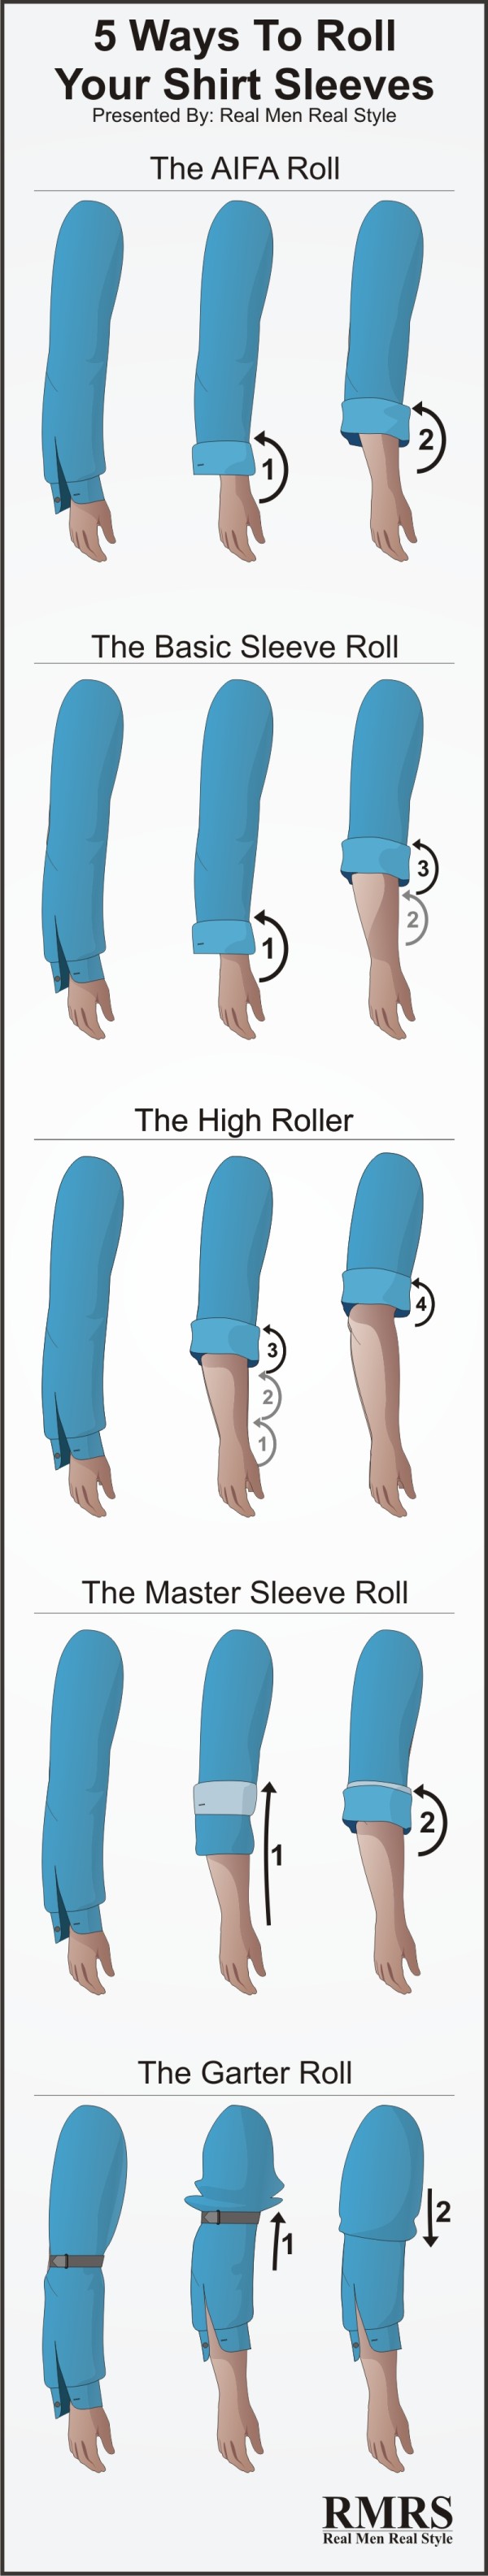 How To Roll Shirt Sleeves.